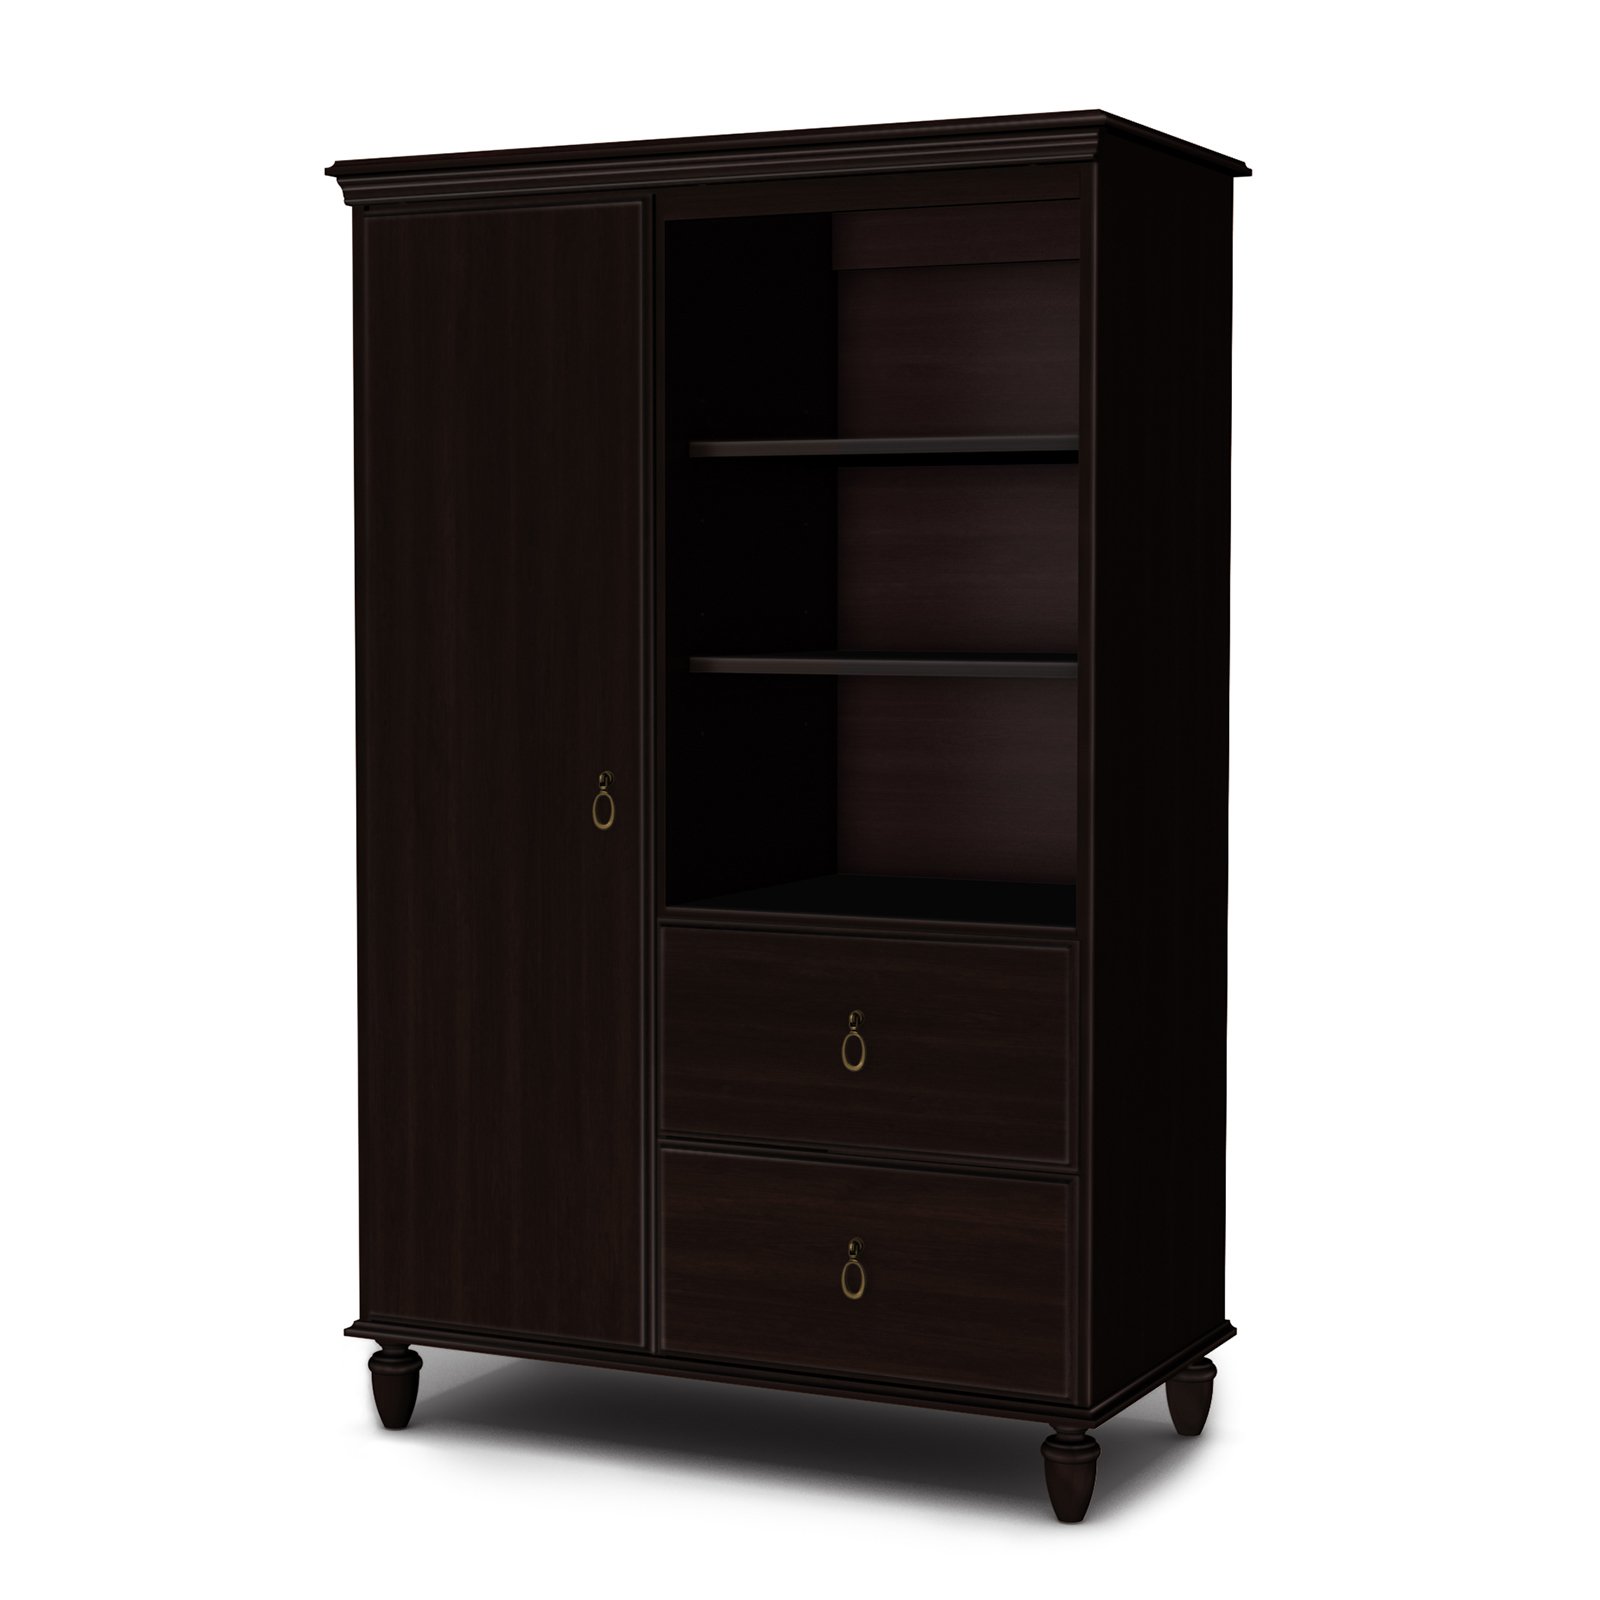 South Shore Moonlight Armoire - image 1 of 4